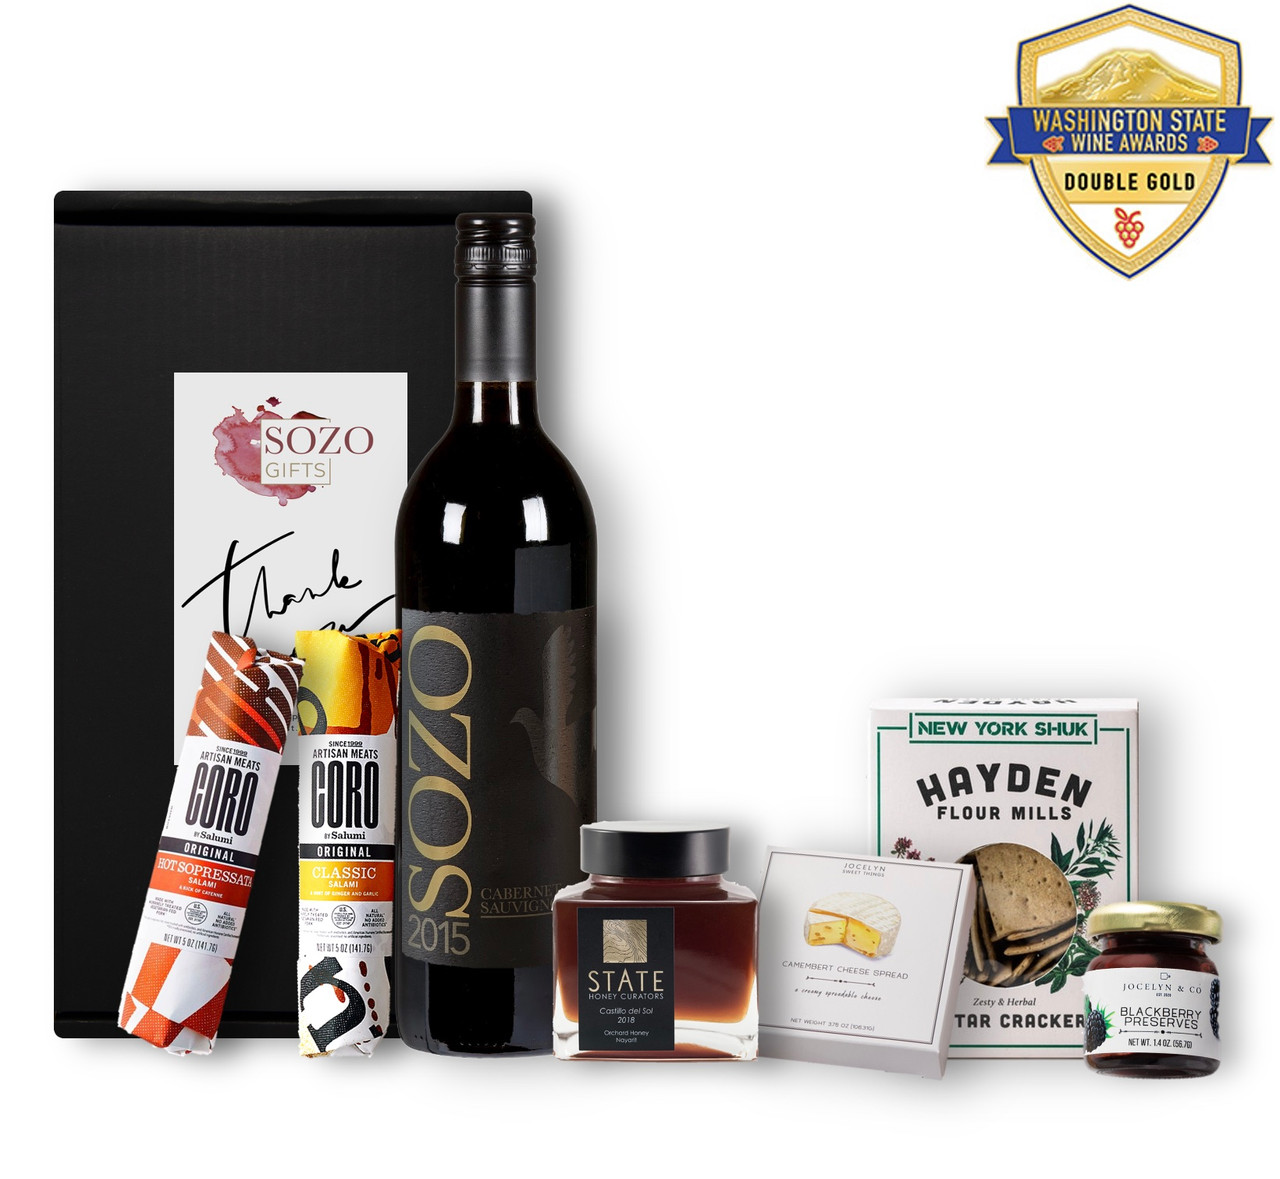 https://cdn11.bigcommerce.com/s-kgihy4hax9/images/stencil/1280w/products/317/1018/Sozo_Gifts_2015_Cabernet_Salami_Duo_Cheese_Honey_Preserves_Crackers_Gift_Box__88336.1665186379.jpg